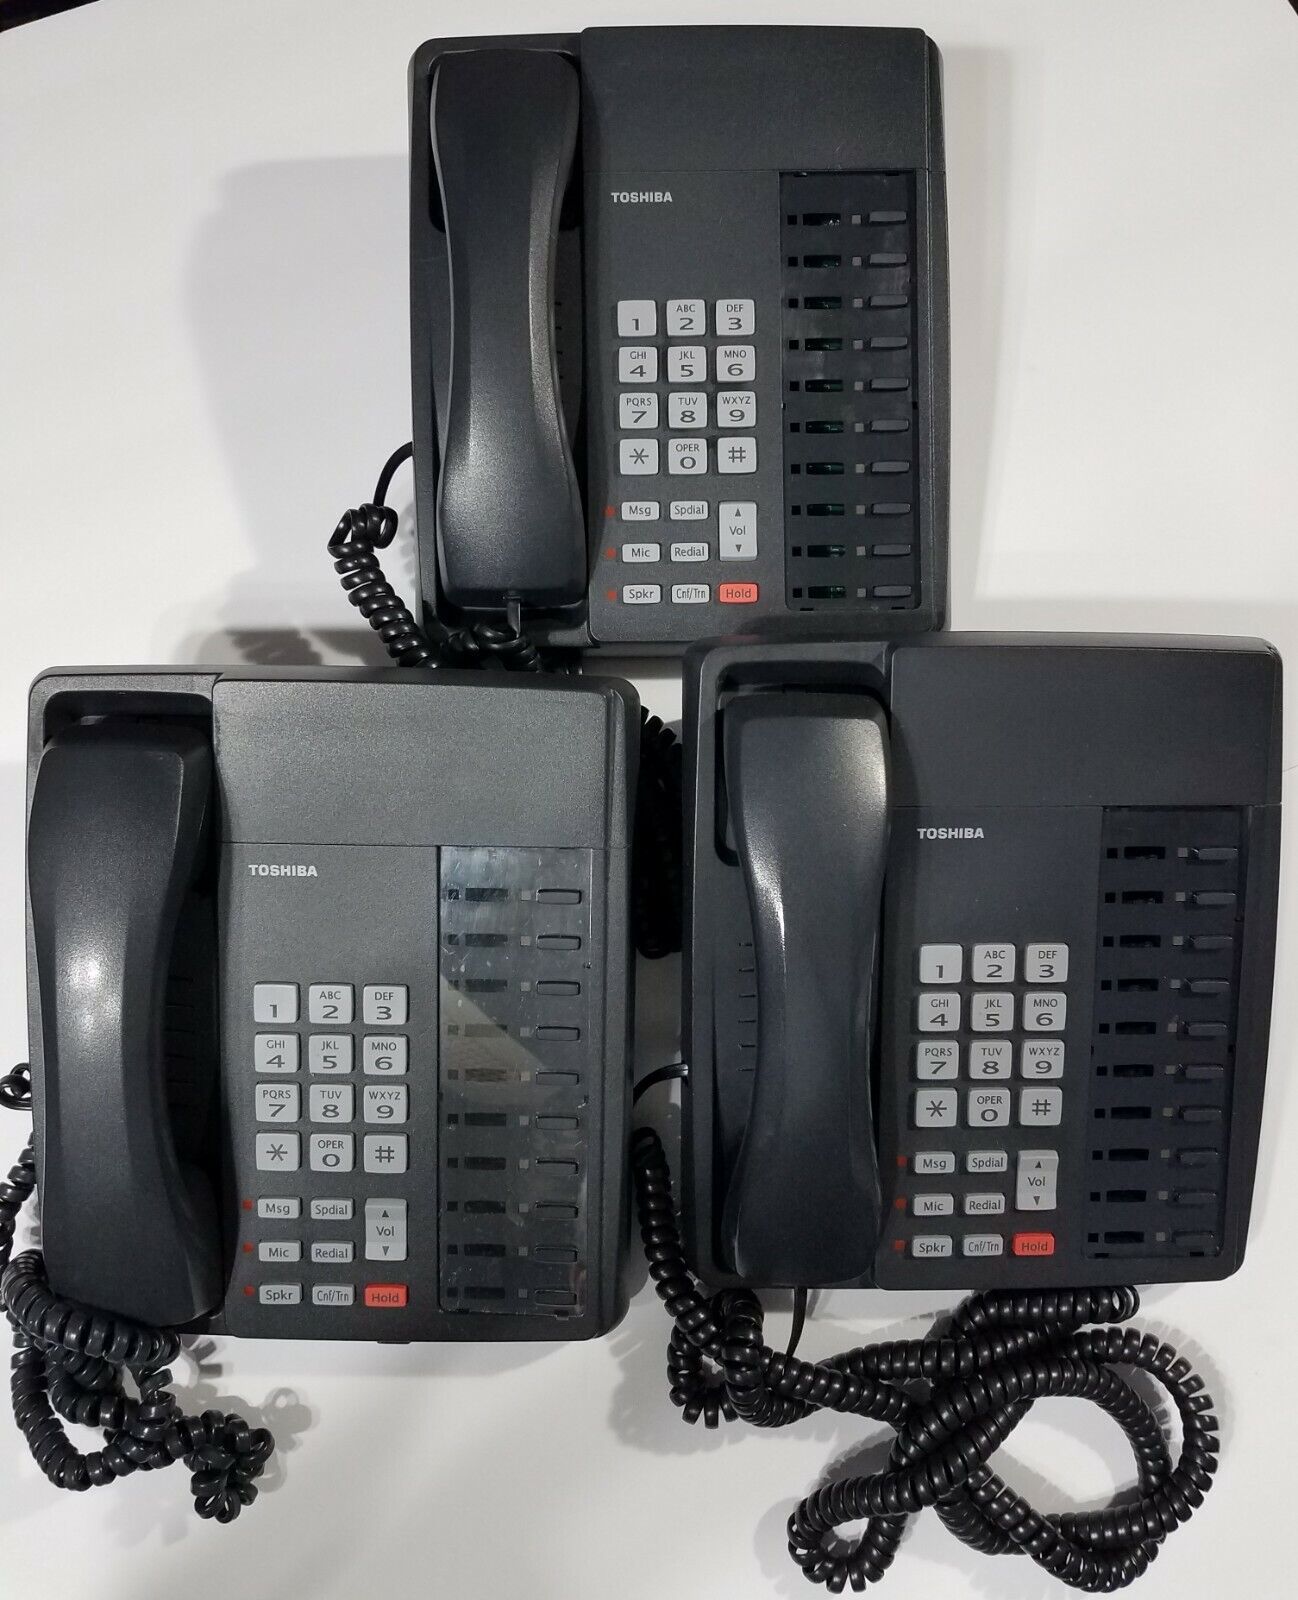 Lot of 3 Toshiba DKT3010-S Digital Business Phones 10 Button Non-Display Phone.